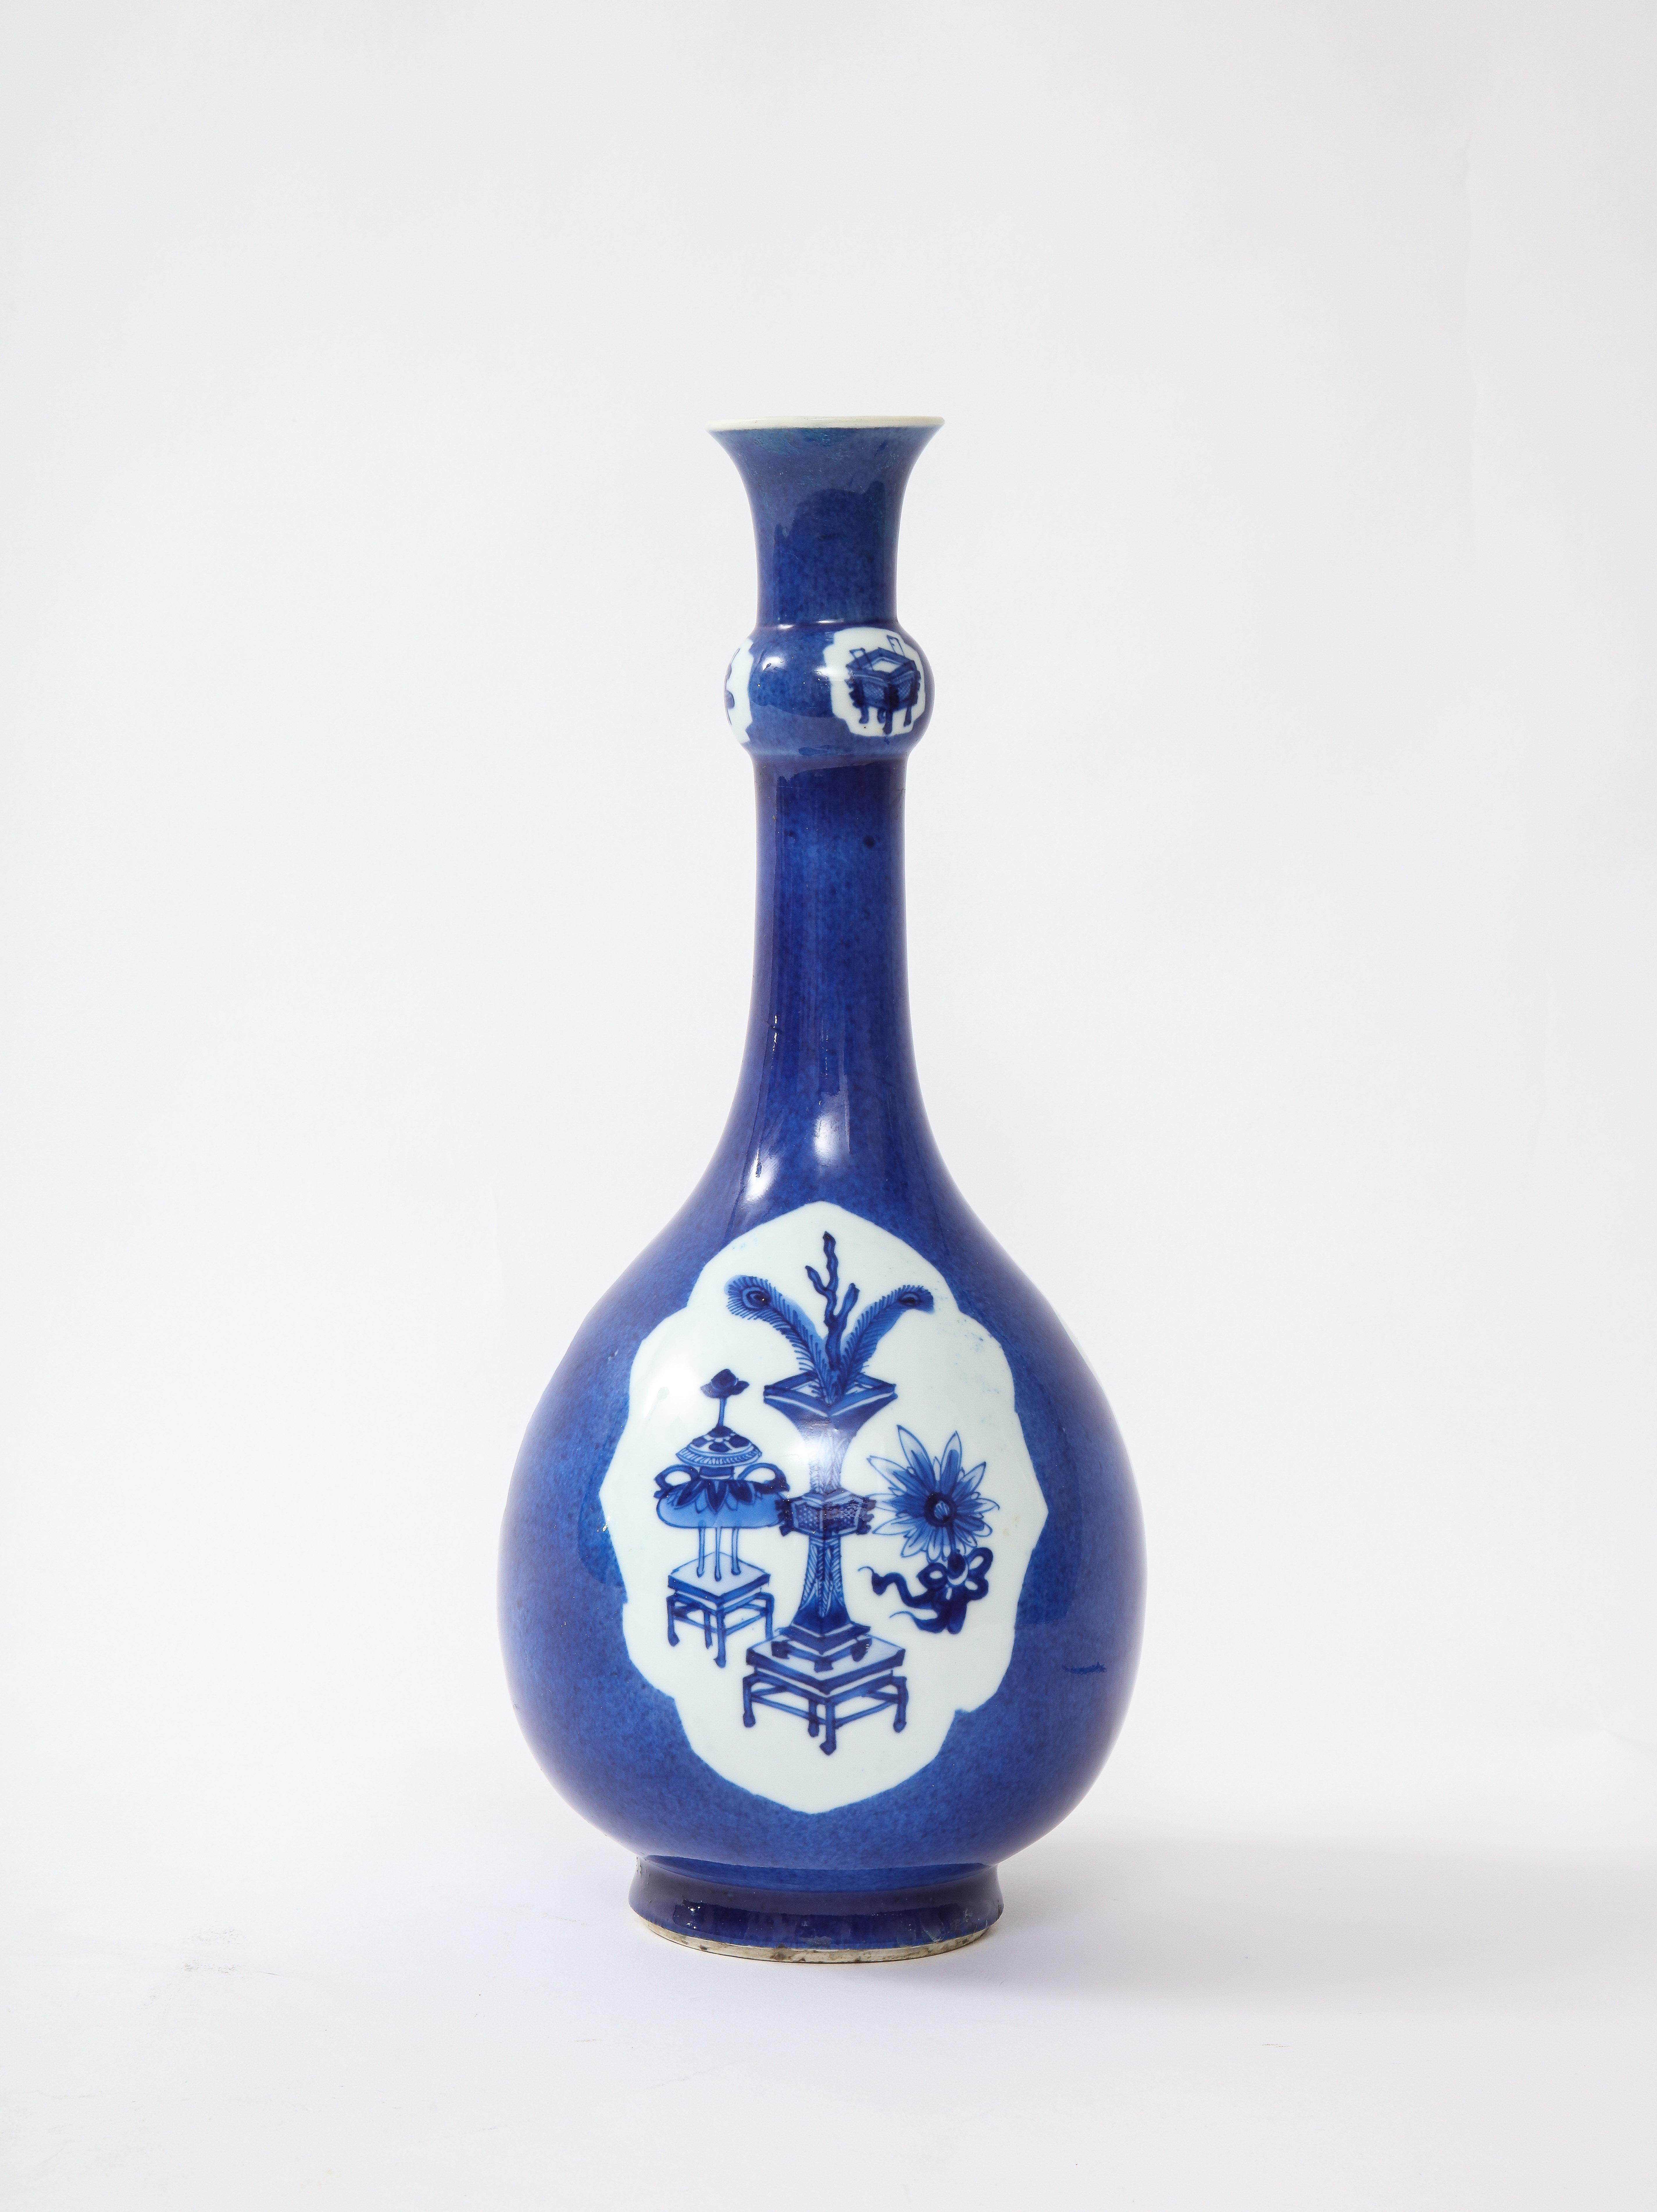 A large, rare, and beautiful Kangxi Period blue and white porcelain pear form and garlic neck vase, From the Collection of the 31st President of the United States, Herbert Hoover. Of pear form with a bulbous garlic neck, this Kangxi era porcelain